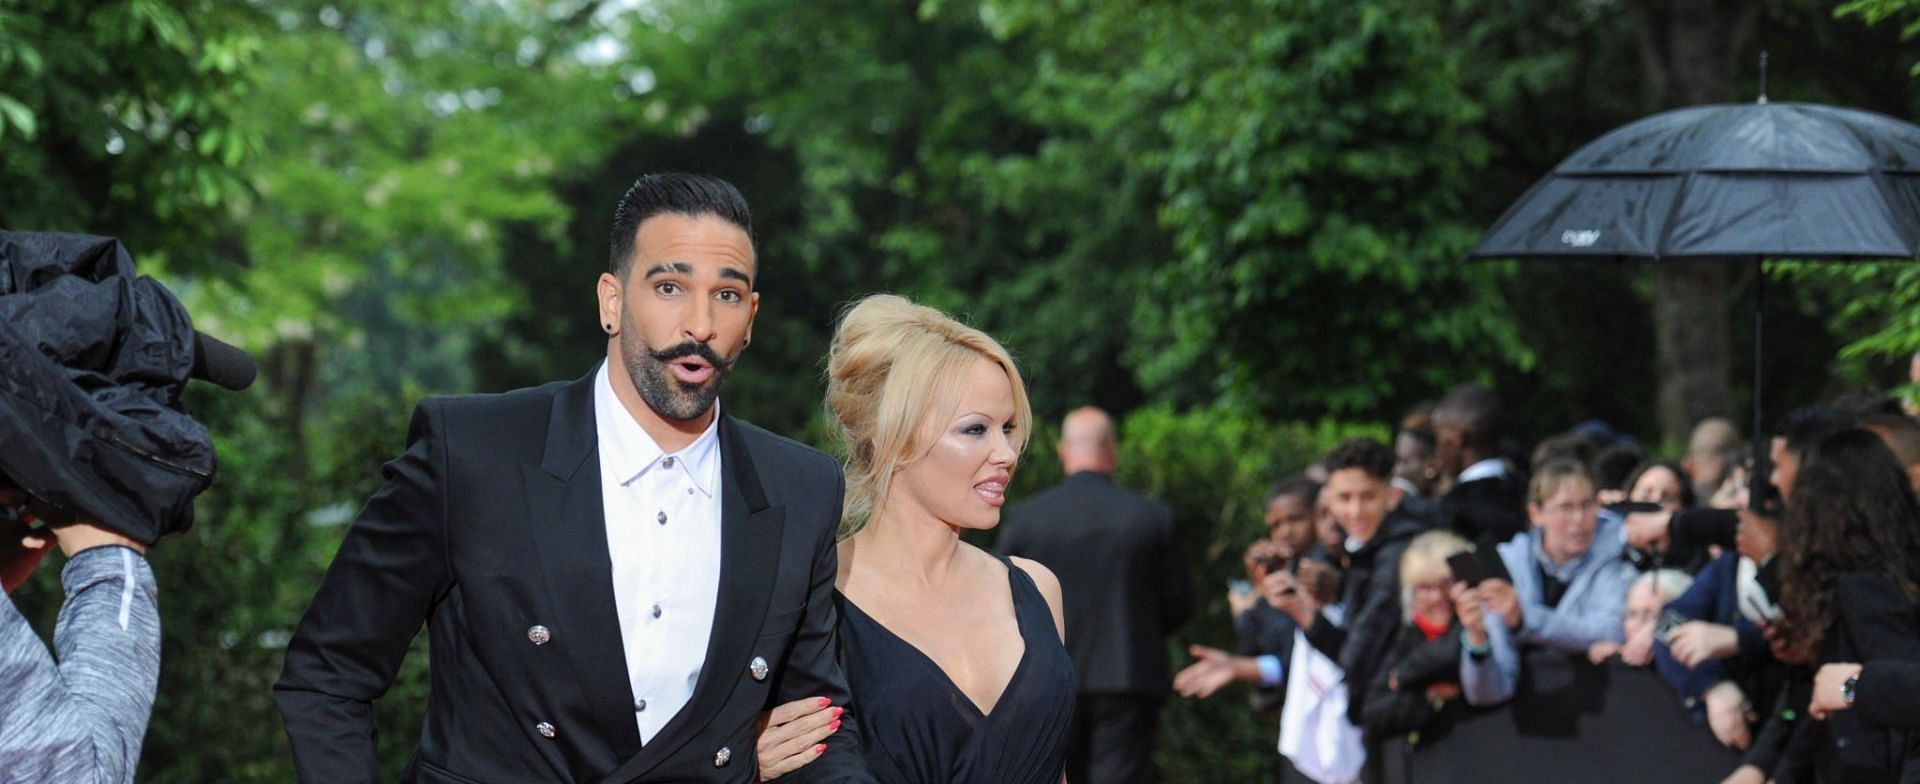 Pamela Anderson and Adil Rami started dating in 2017 (Image via Getty Images)